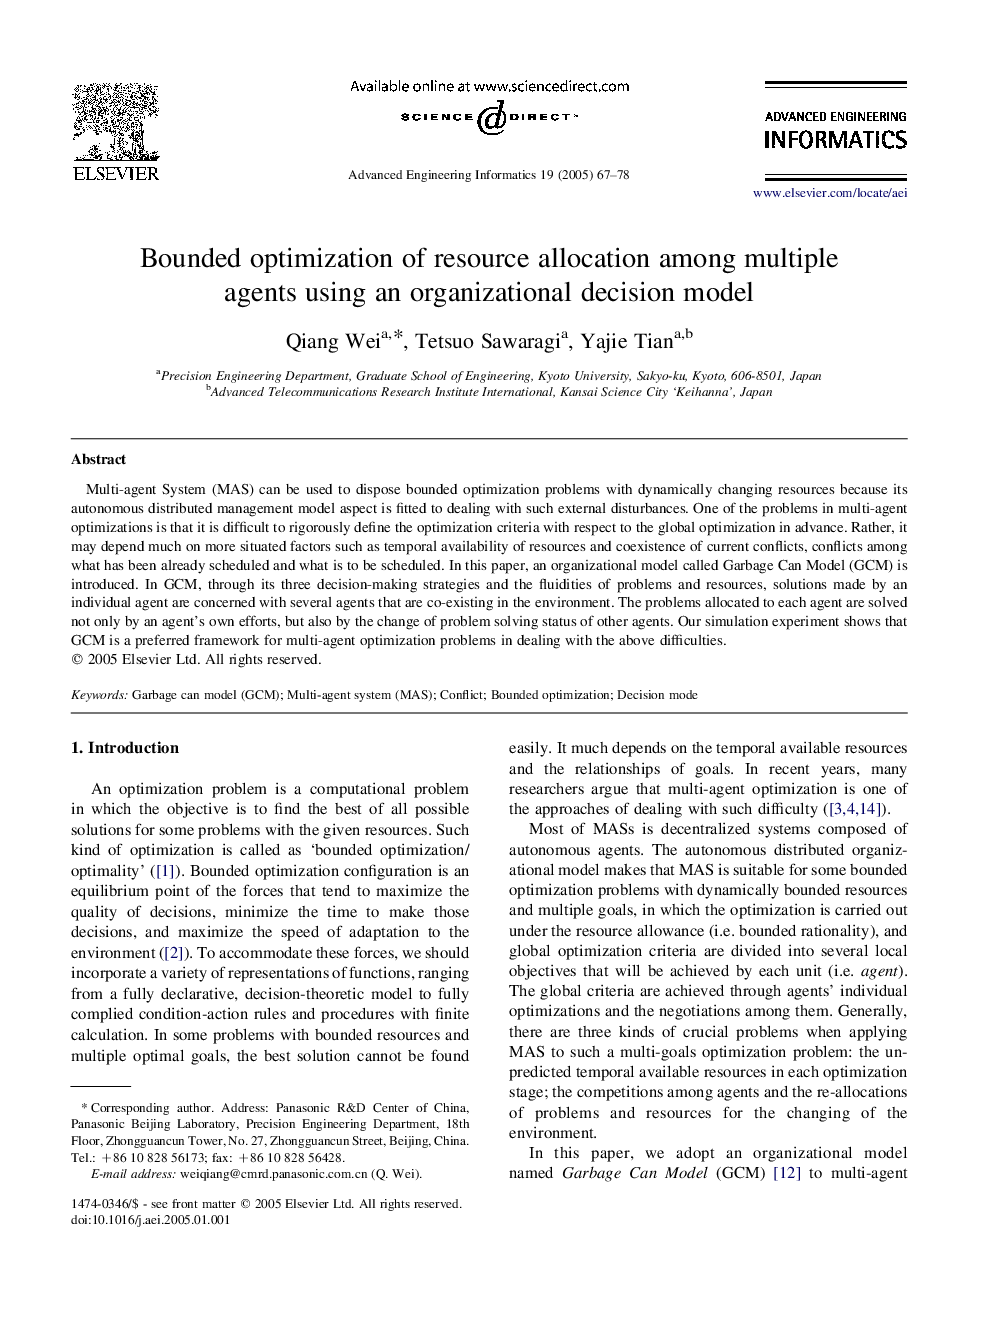 Bounded optimization of resource allocation among multiple agents using an organizational decision model